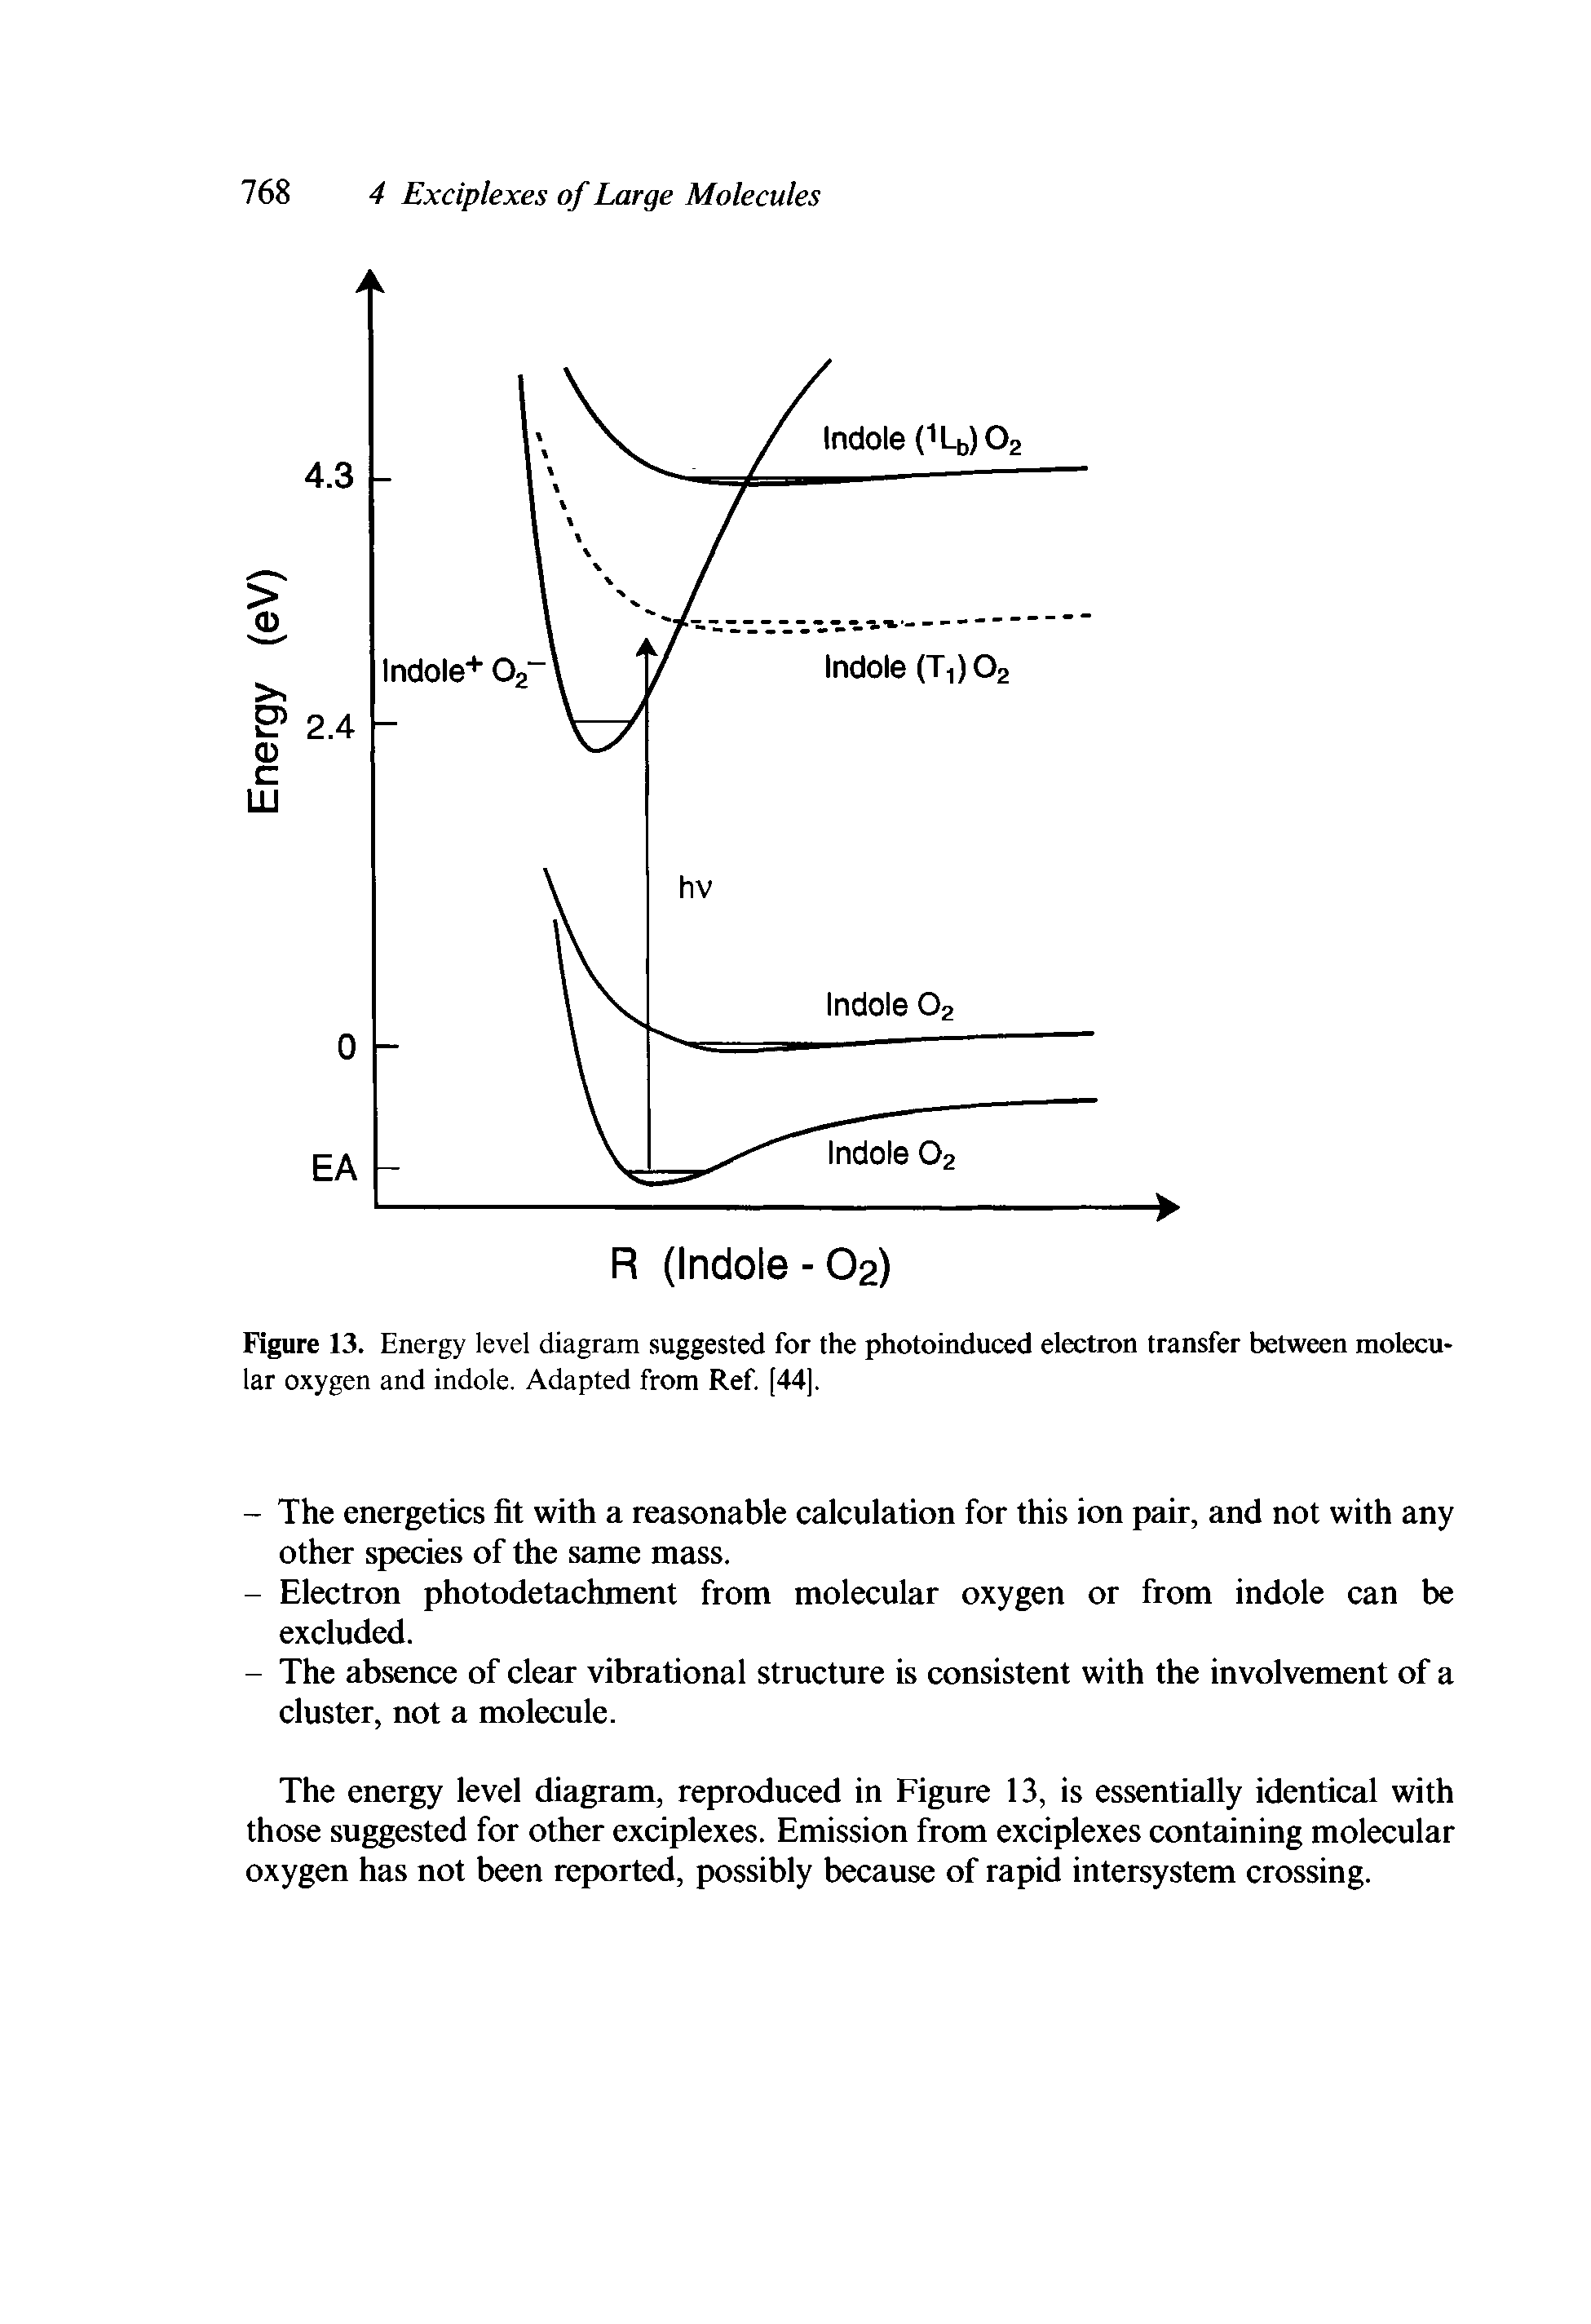 Figure 13. Energy level diagram suggested for the photoinduced electron transfer between molecular oxygen and indole. Adapted from Ref [44].